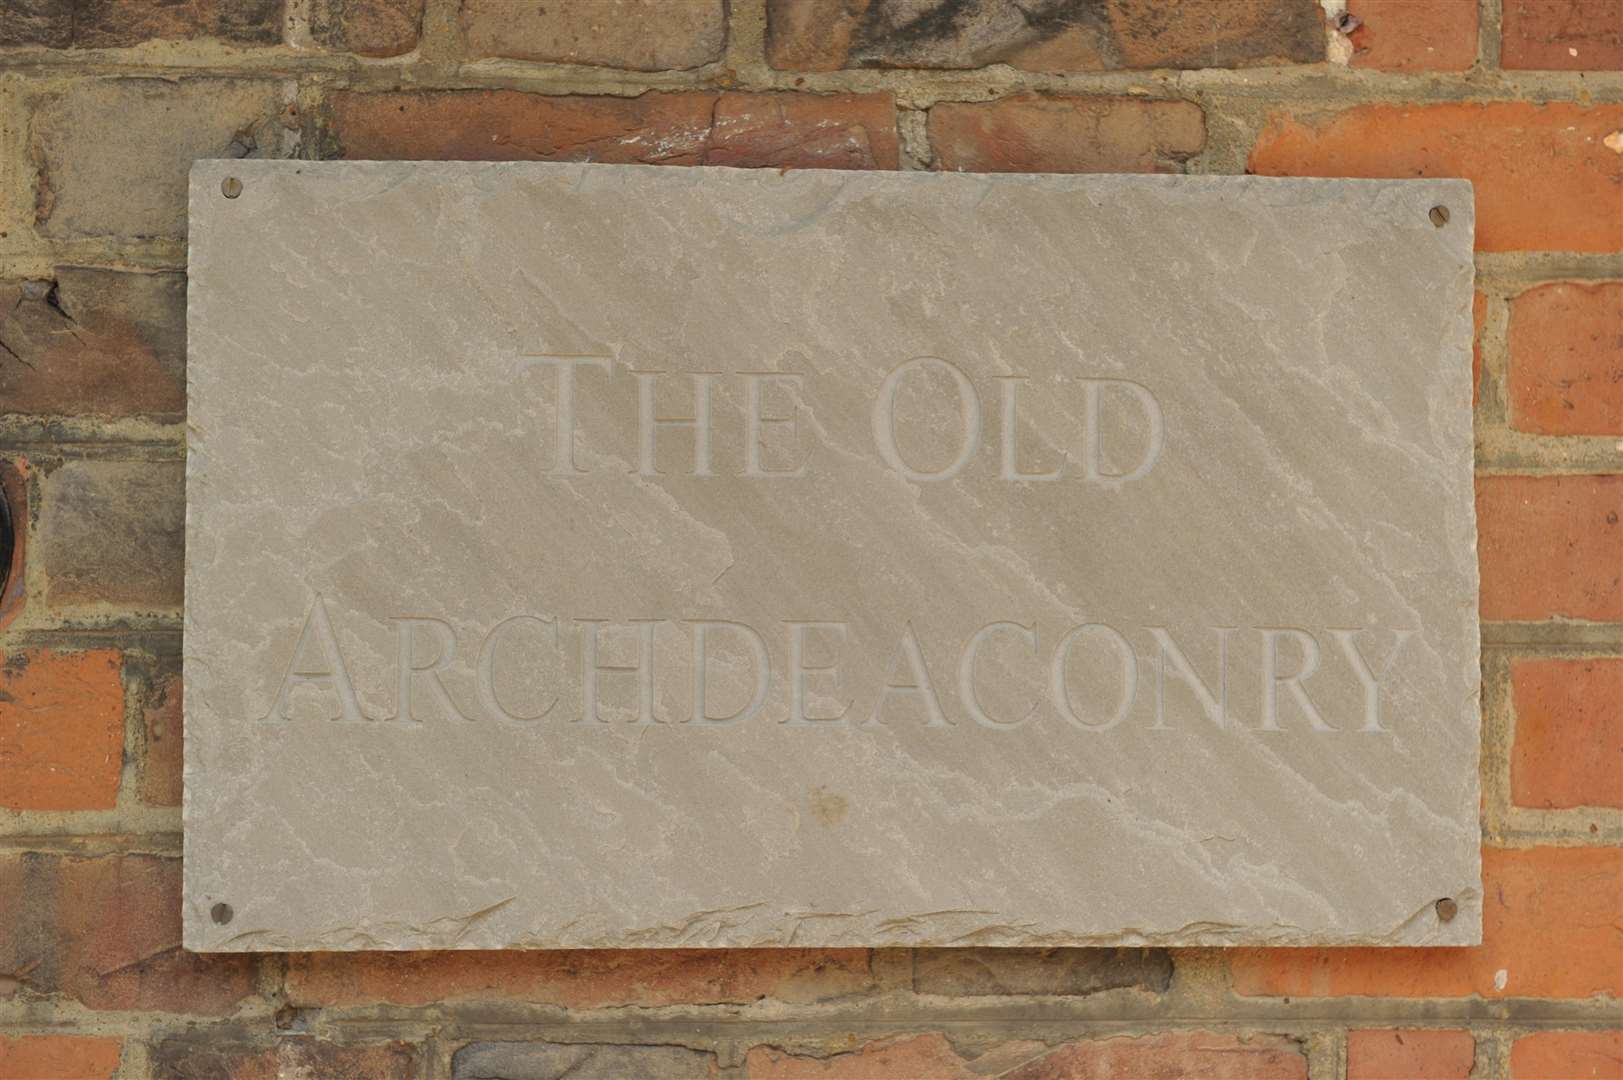 The Old Archdeaconry